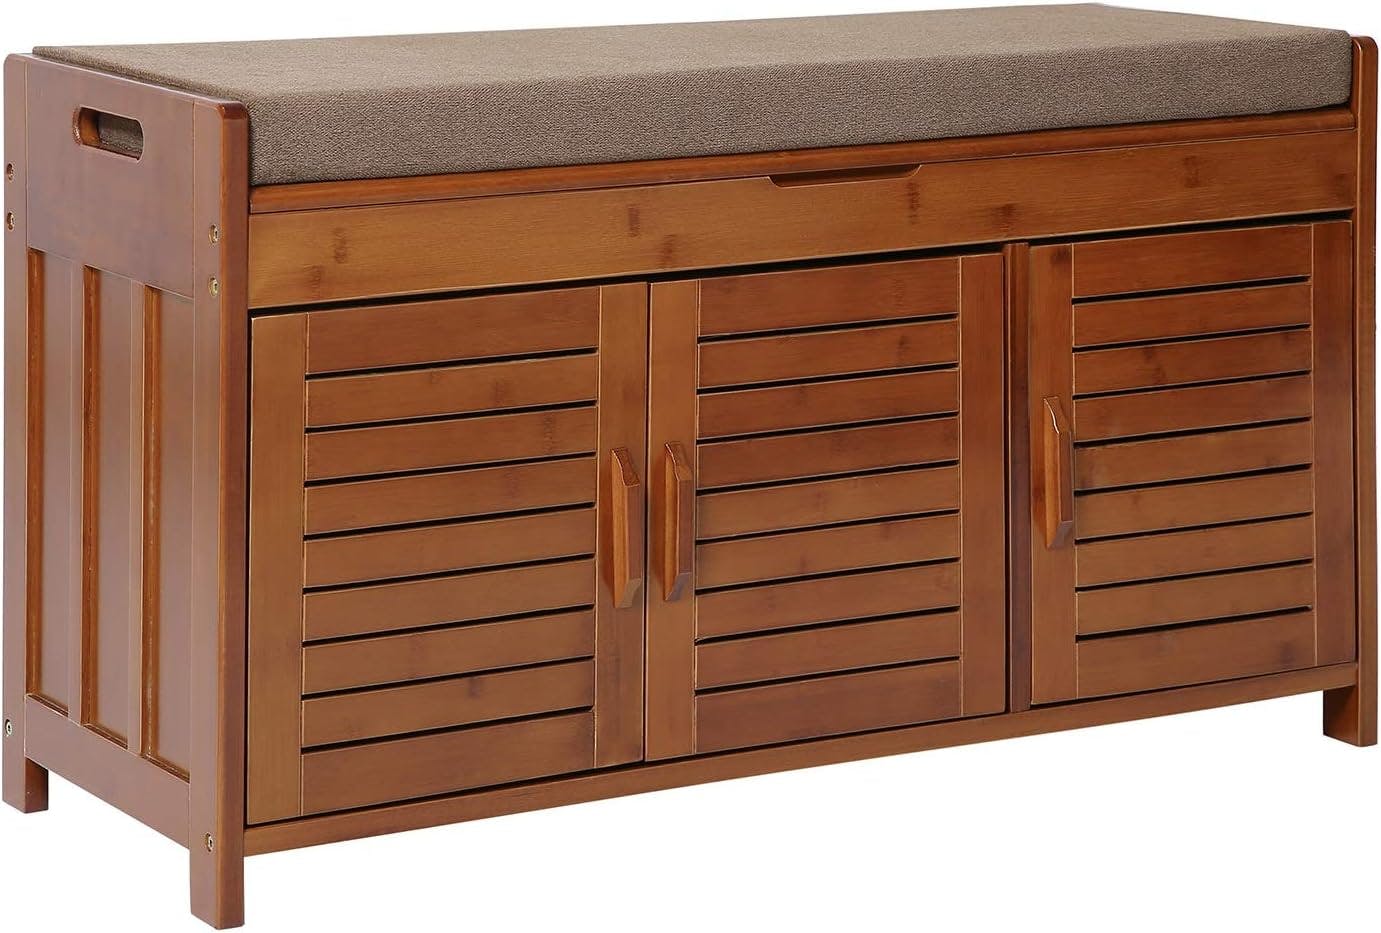 Bamboo Entryway Bench with Hidden Shoe Storage and Detachable Cushion